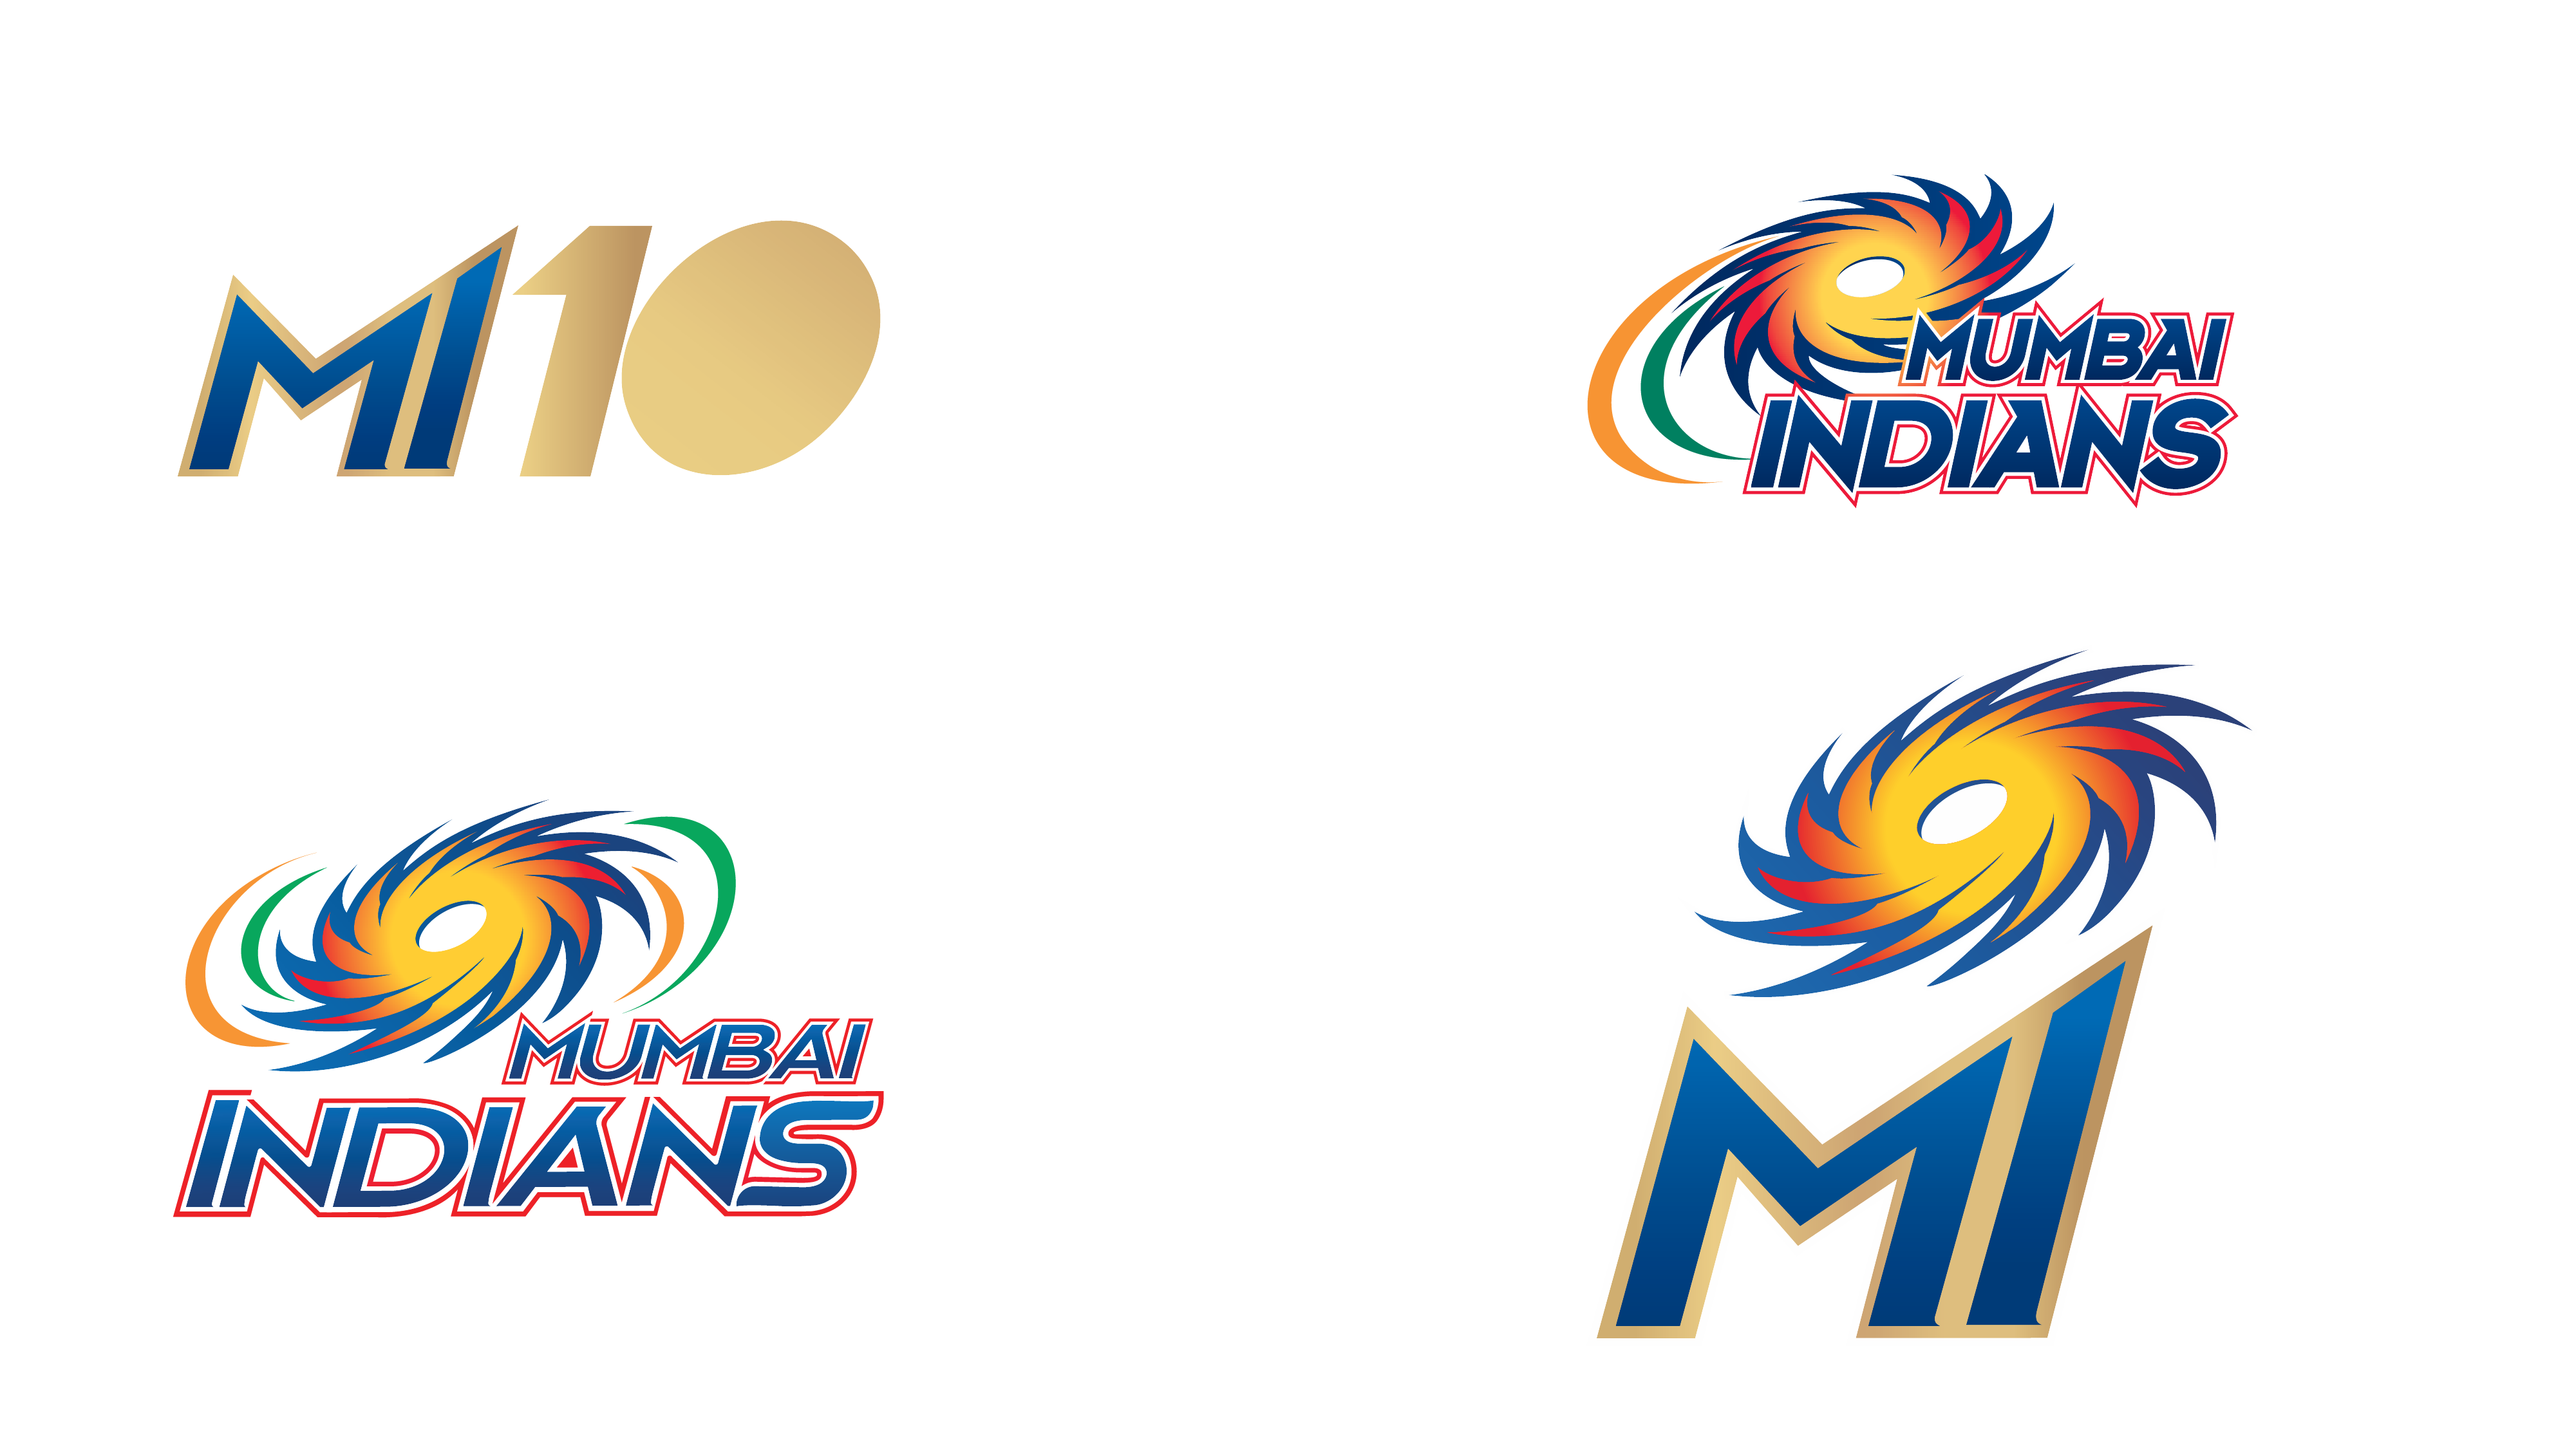 Mumbai Indians Official App on the App Store-donghotantheky.vn